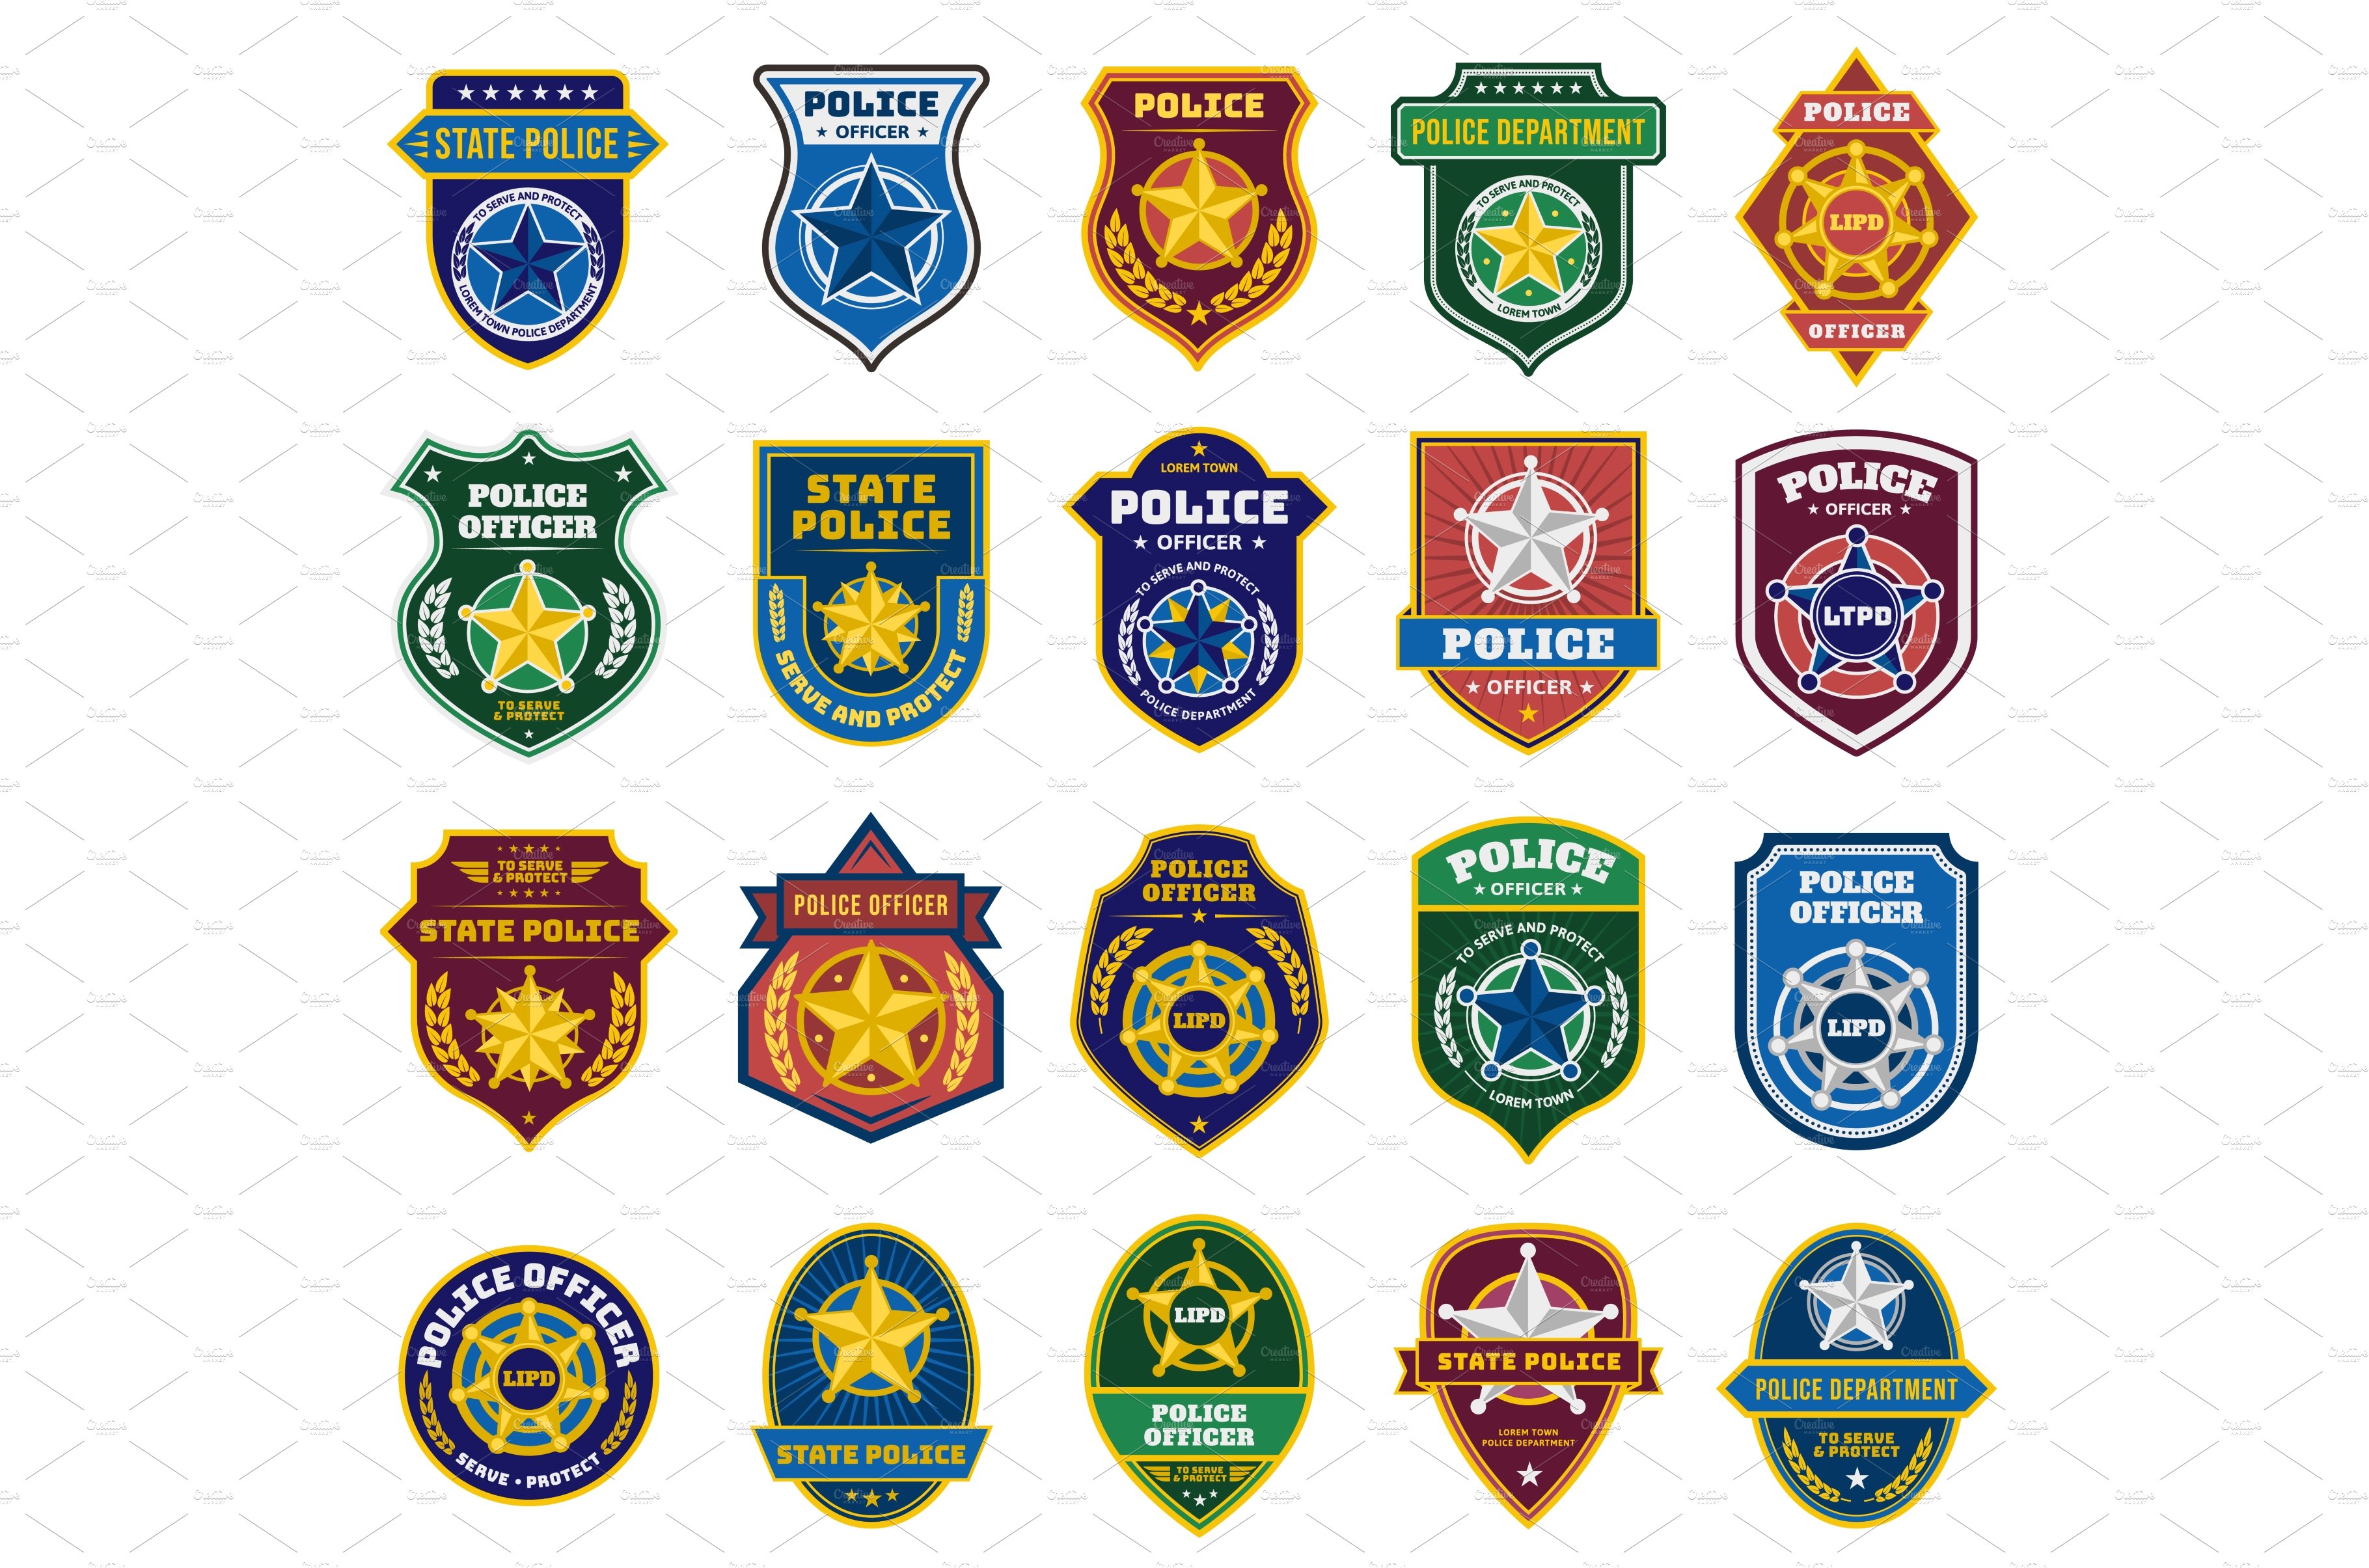 Police badges. Security officer and cover image.